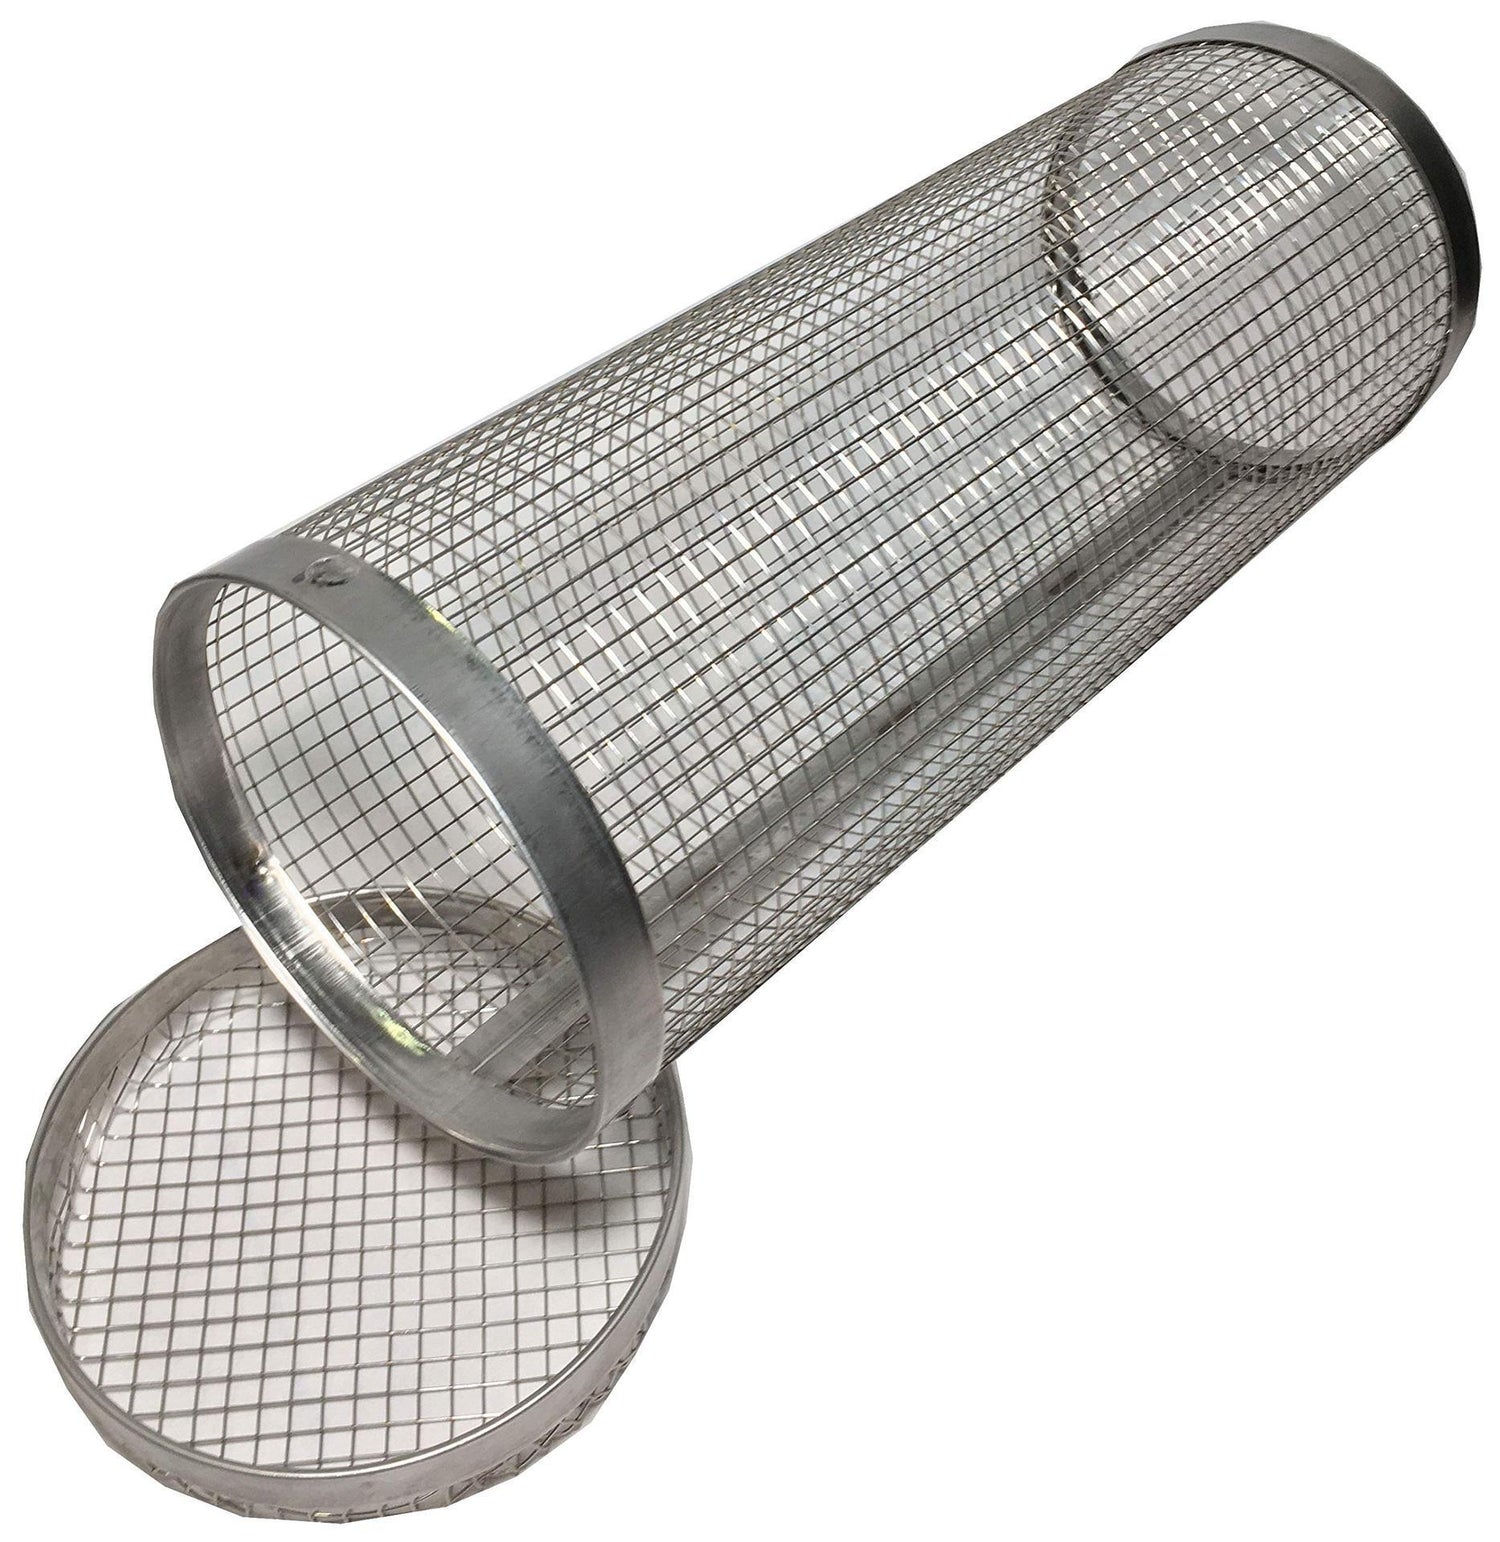 Stainless Steel Rolling Barbecue Basket